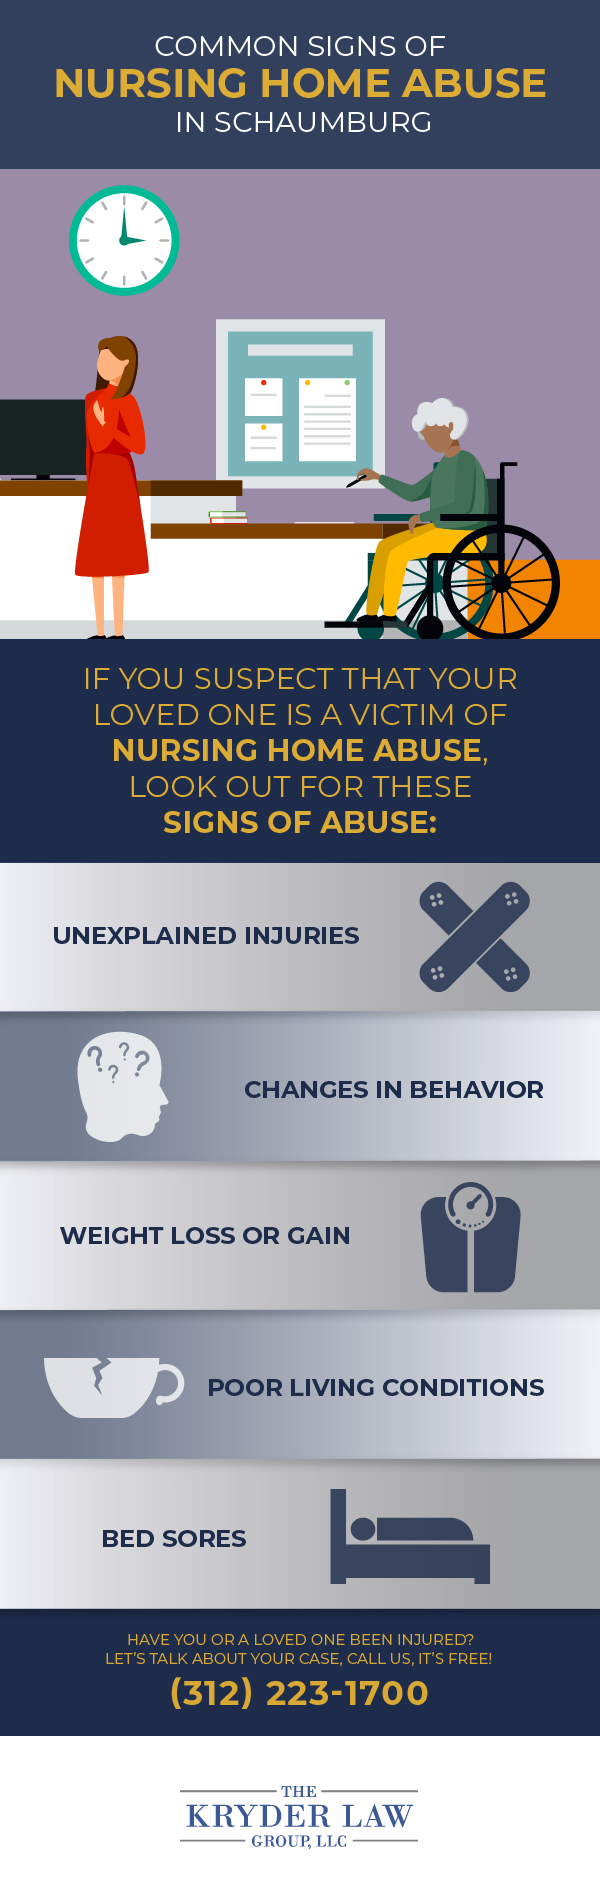 Common signs of Nursing Home Abuse in Schaumburg Infographic